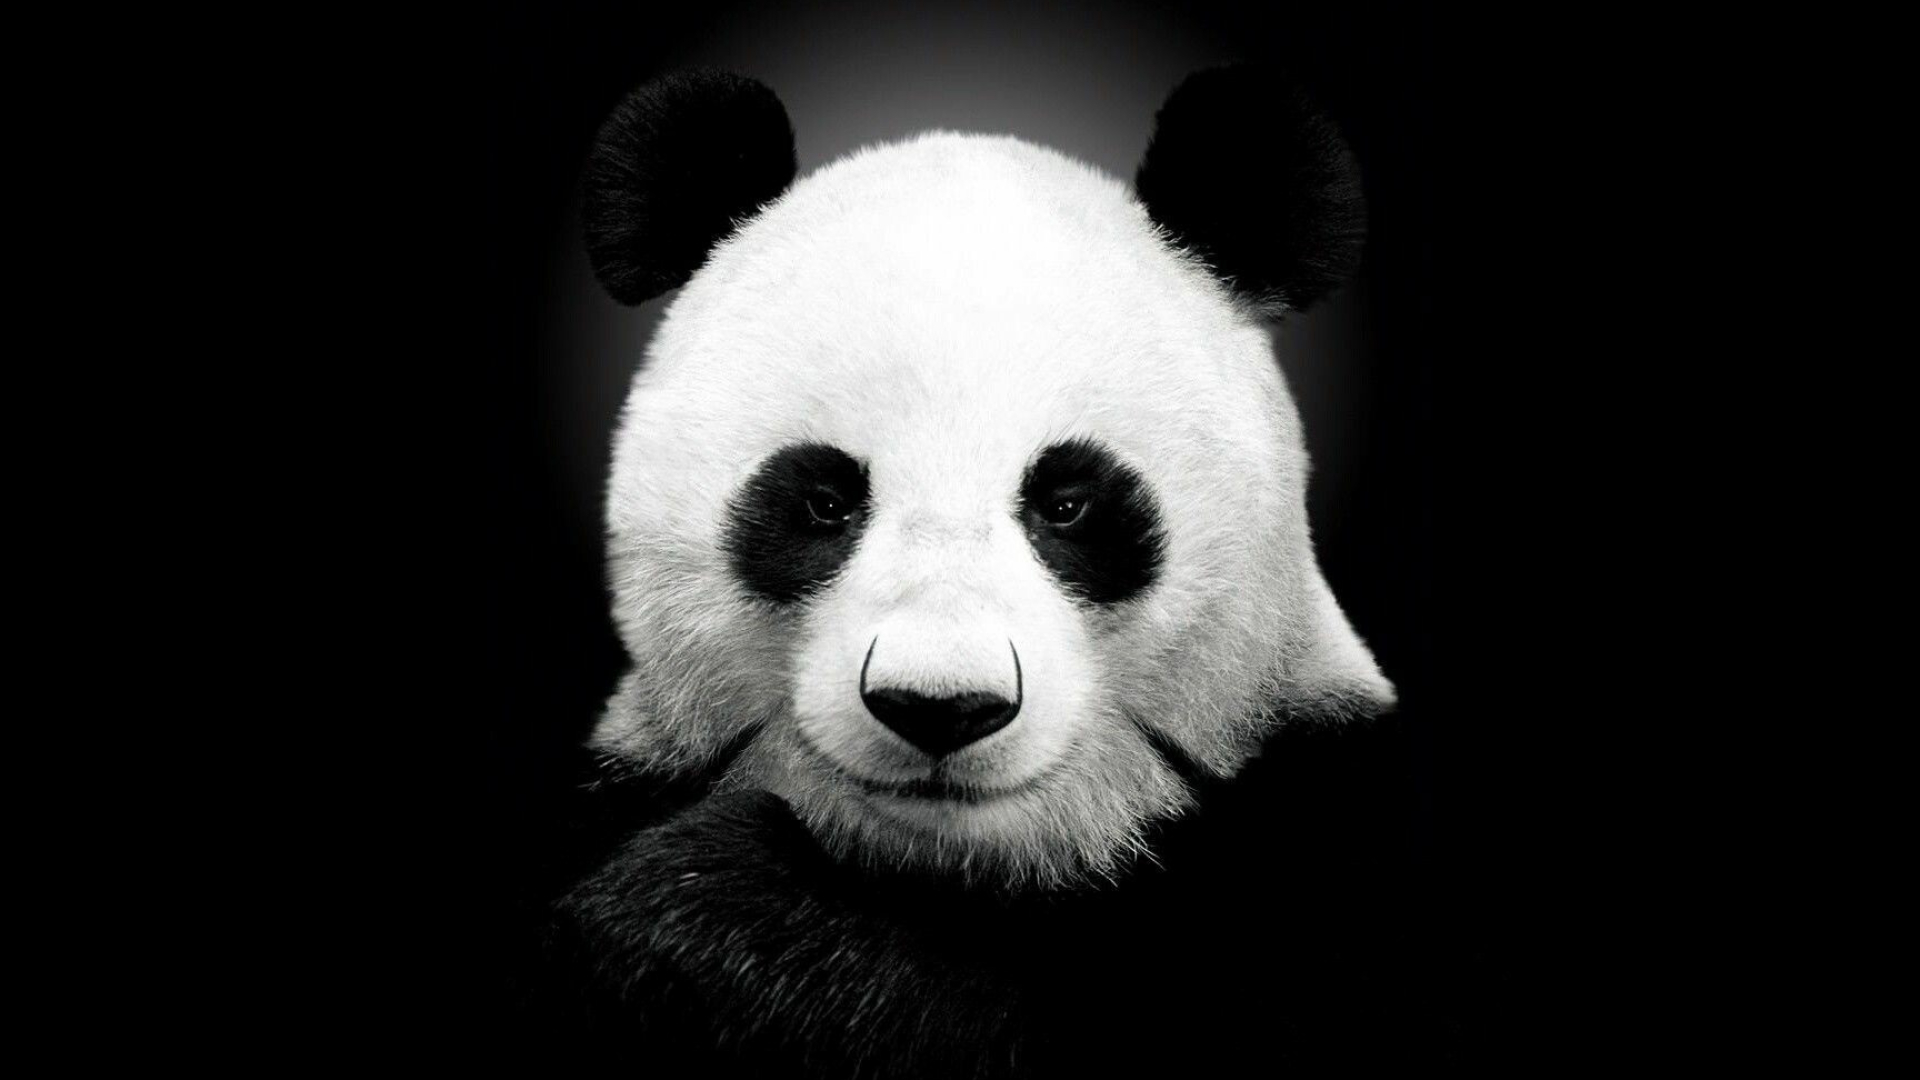 Panda: A large mammal native to central China, Monochrome. 1920x1080 Full HD Background.